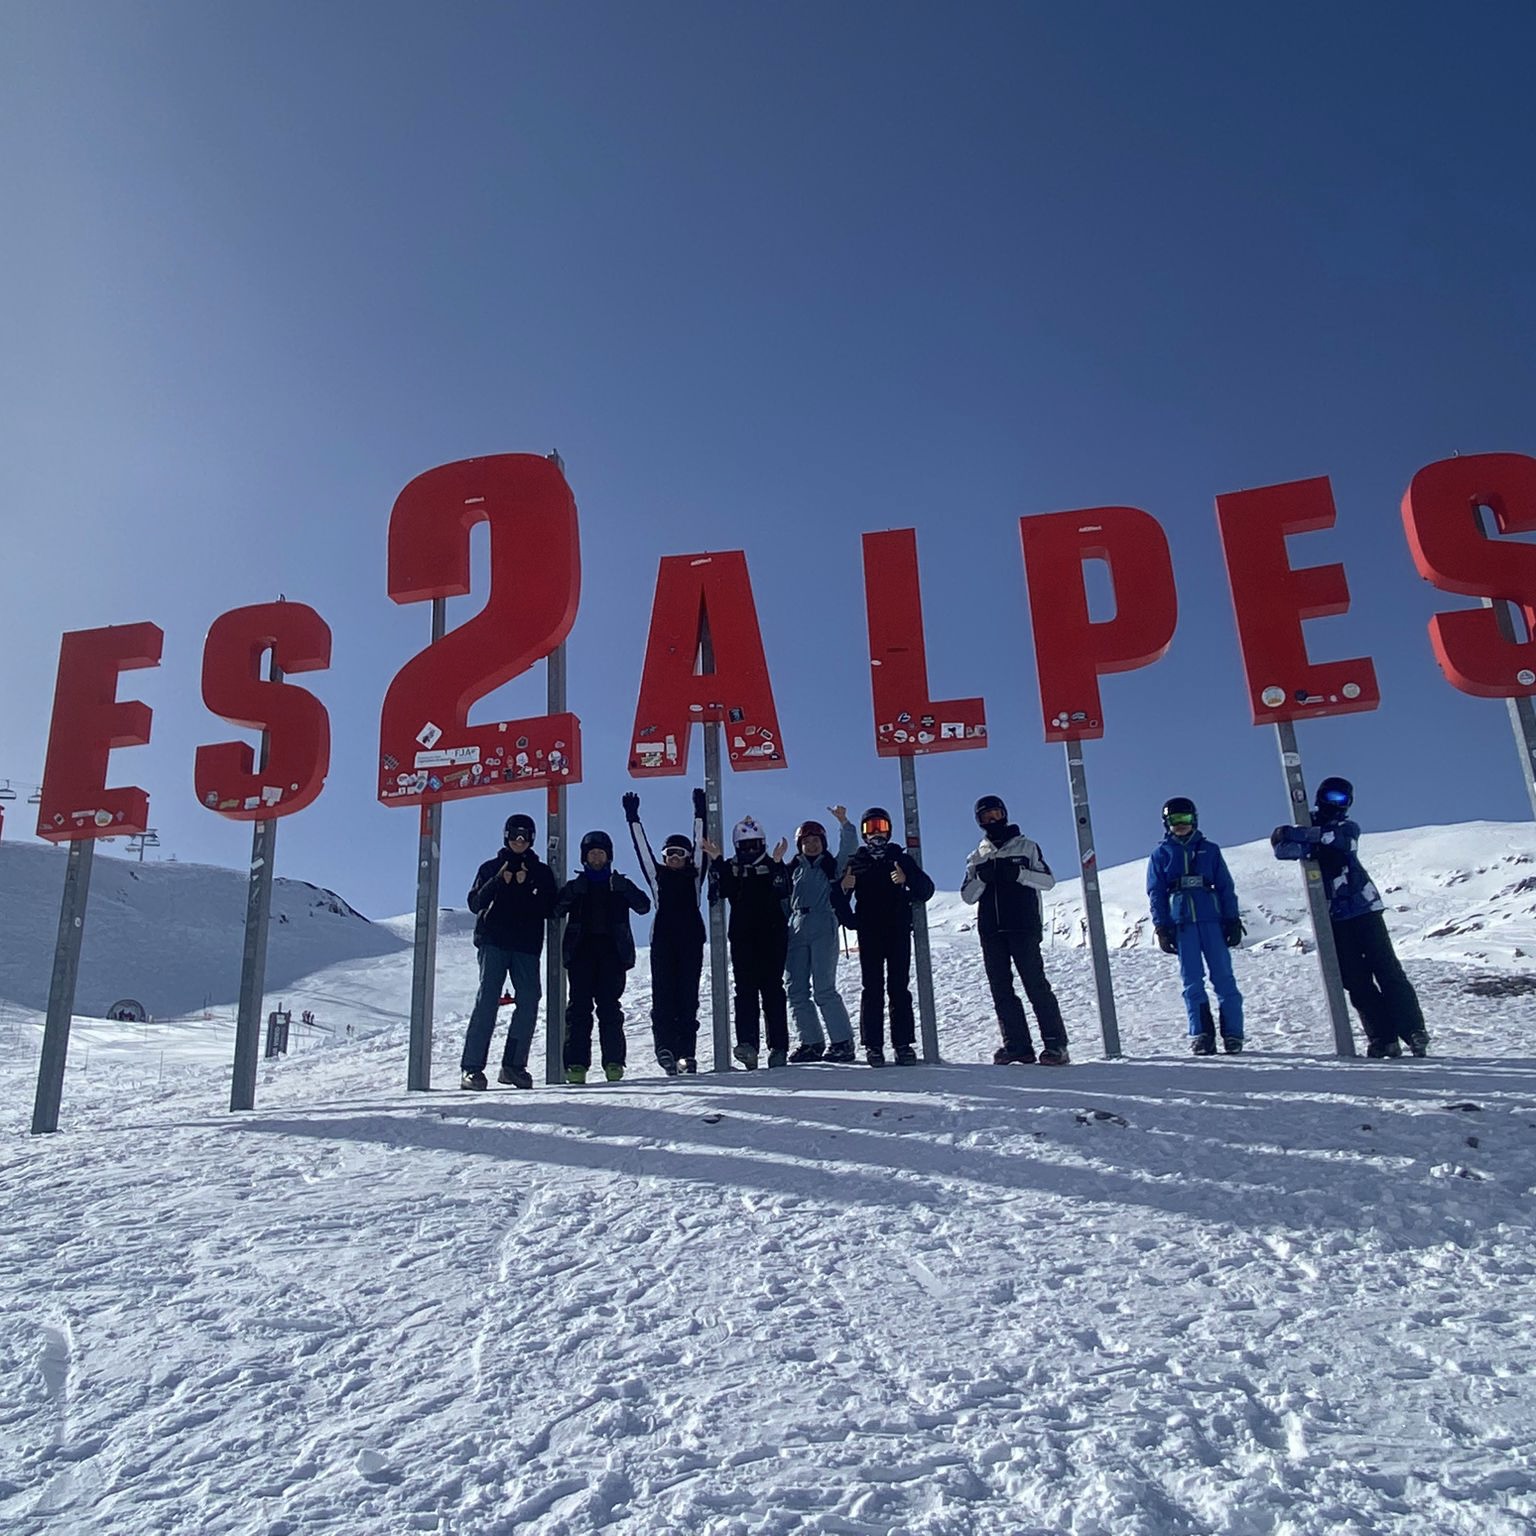 Group photograph on the slopes, underneath red letters sign